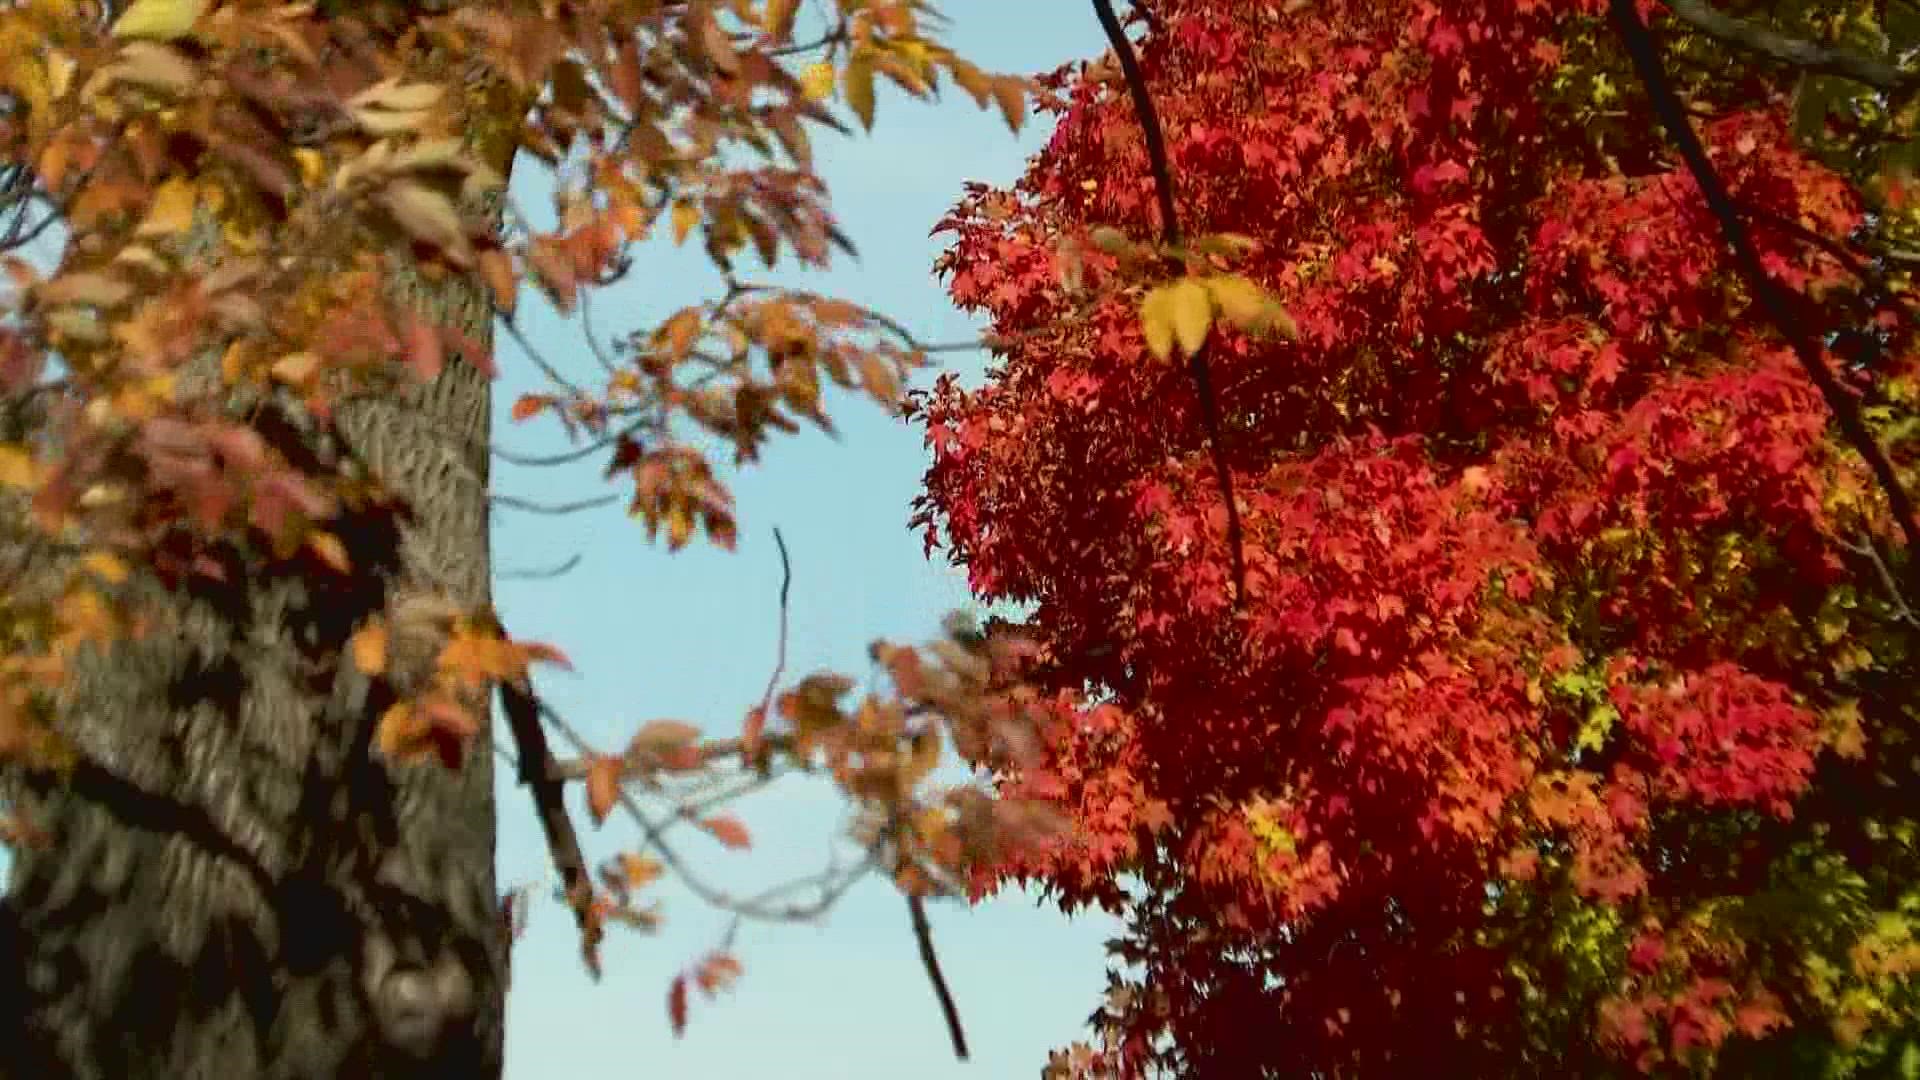 Conservation experts in Maine are reminding folks of the benefits of not raking up leaves this time of year.